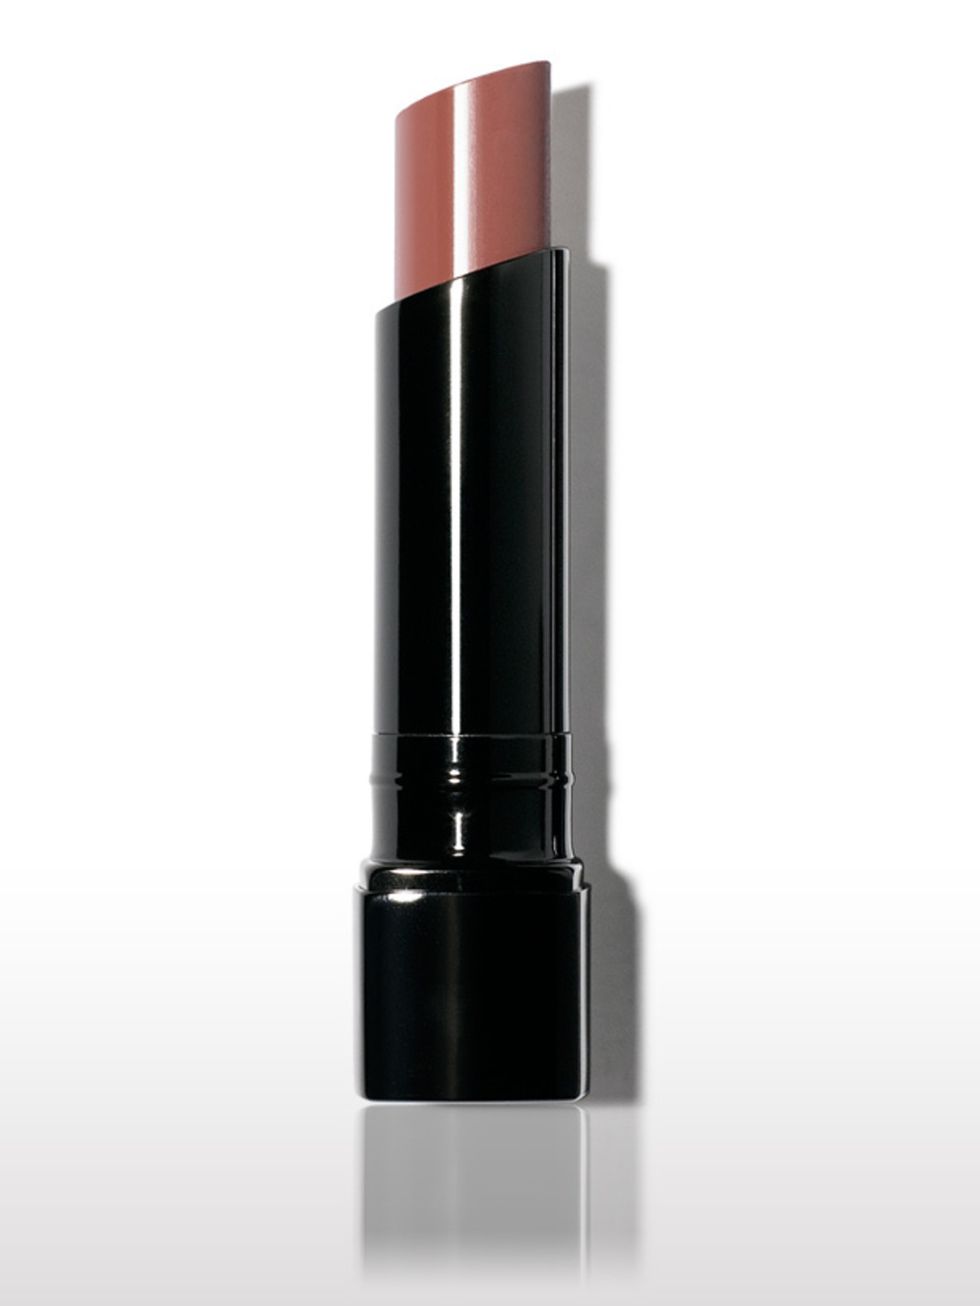 <p>Creamy Lip Colour in Italian Rose, £13.70, <a href="http://www.bobbibrown.co.uk/templates/products/sp.tmpl?CATEGORY_ID=CAT6088&amp;PRODUCT_ID=PROD89445">www.bobbibrown.co.uk</a> </p><p> </p><p>Beauty is about being comfortable in your own skin, says 